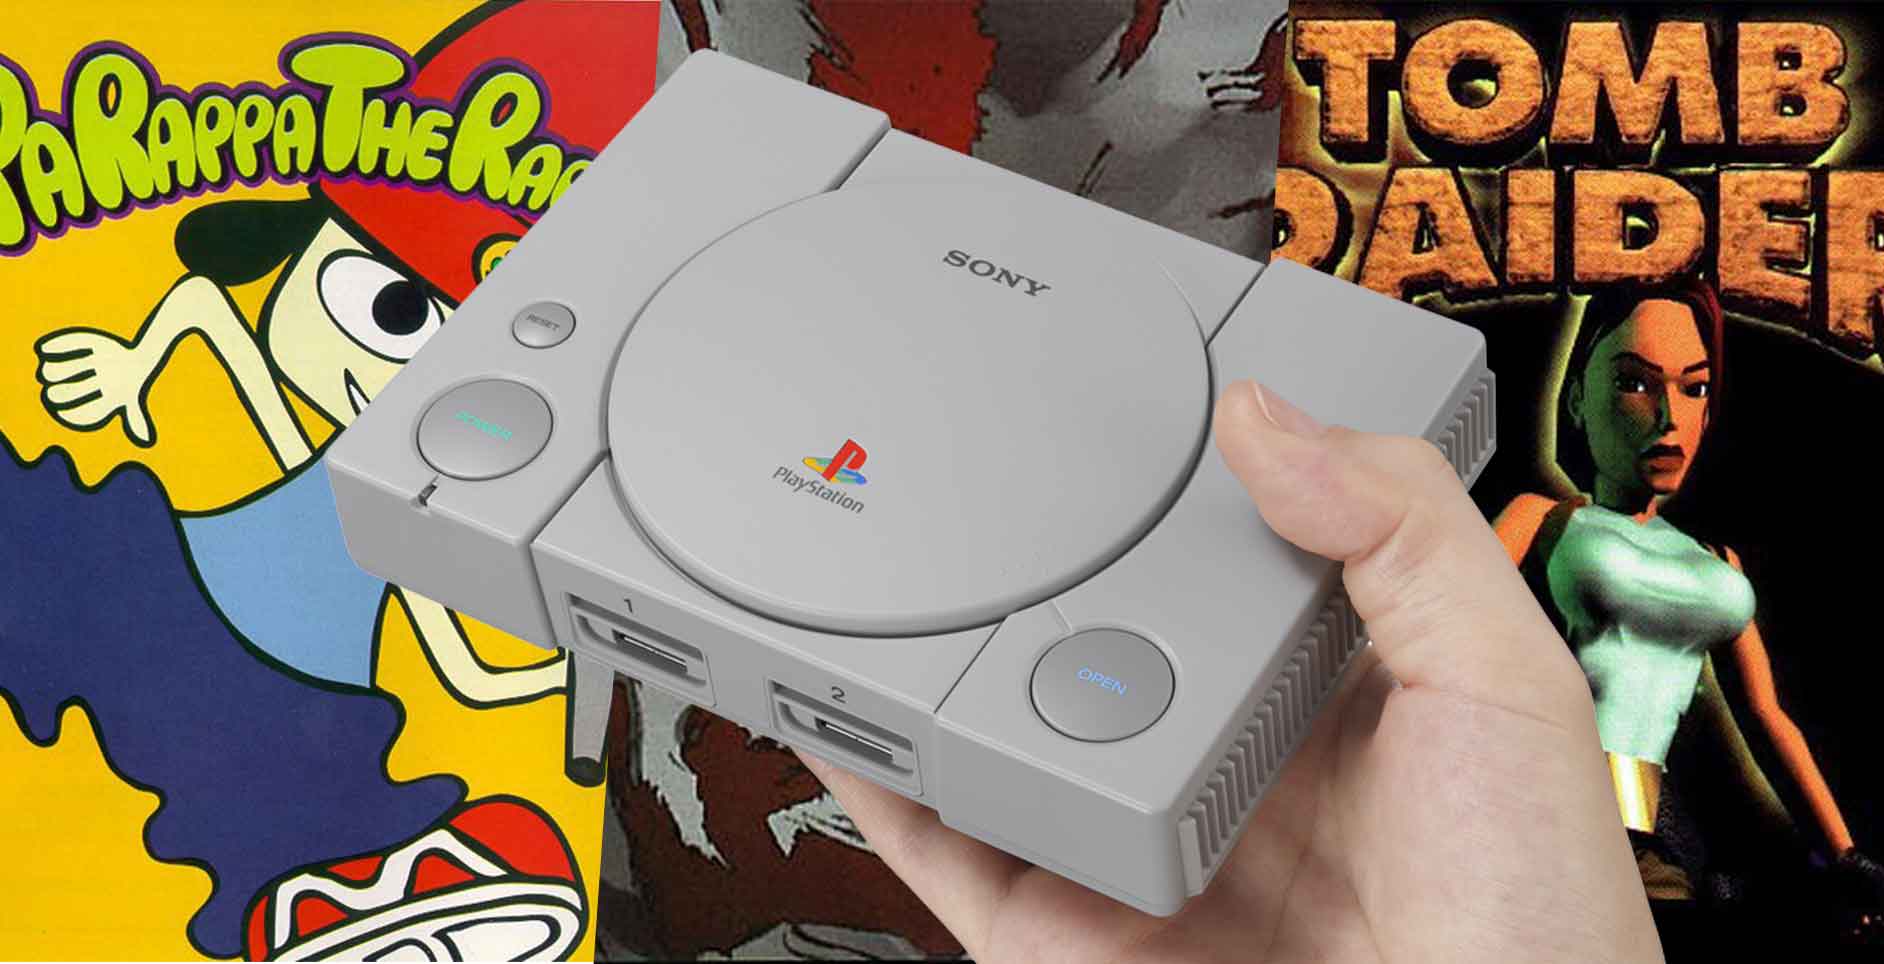 games on the playstation classic